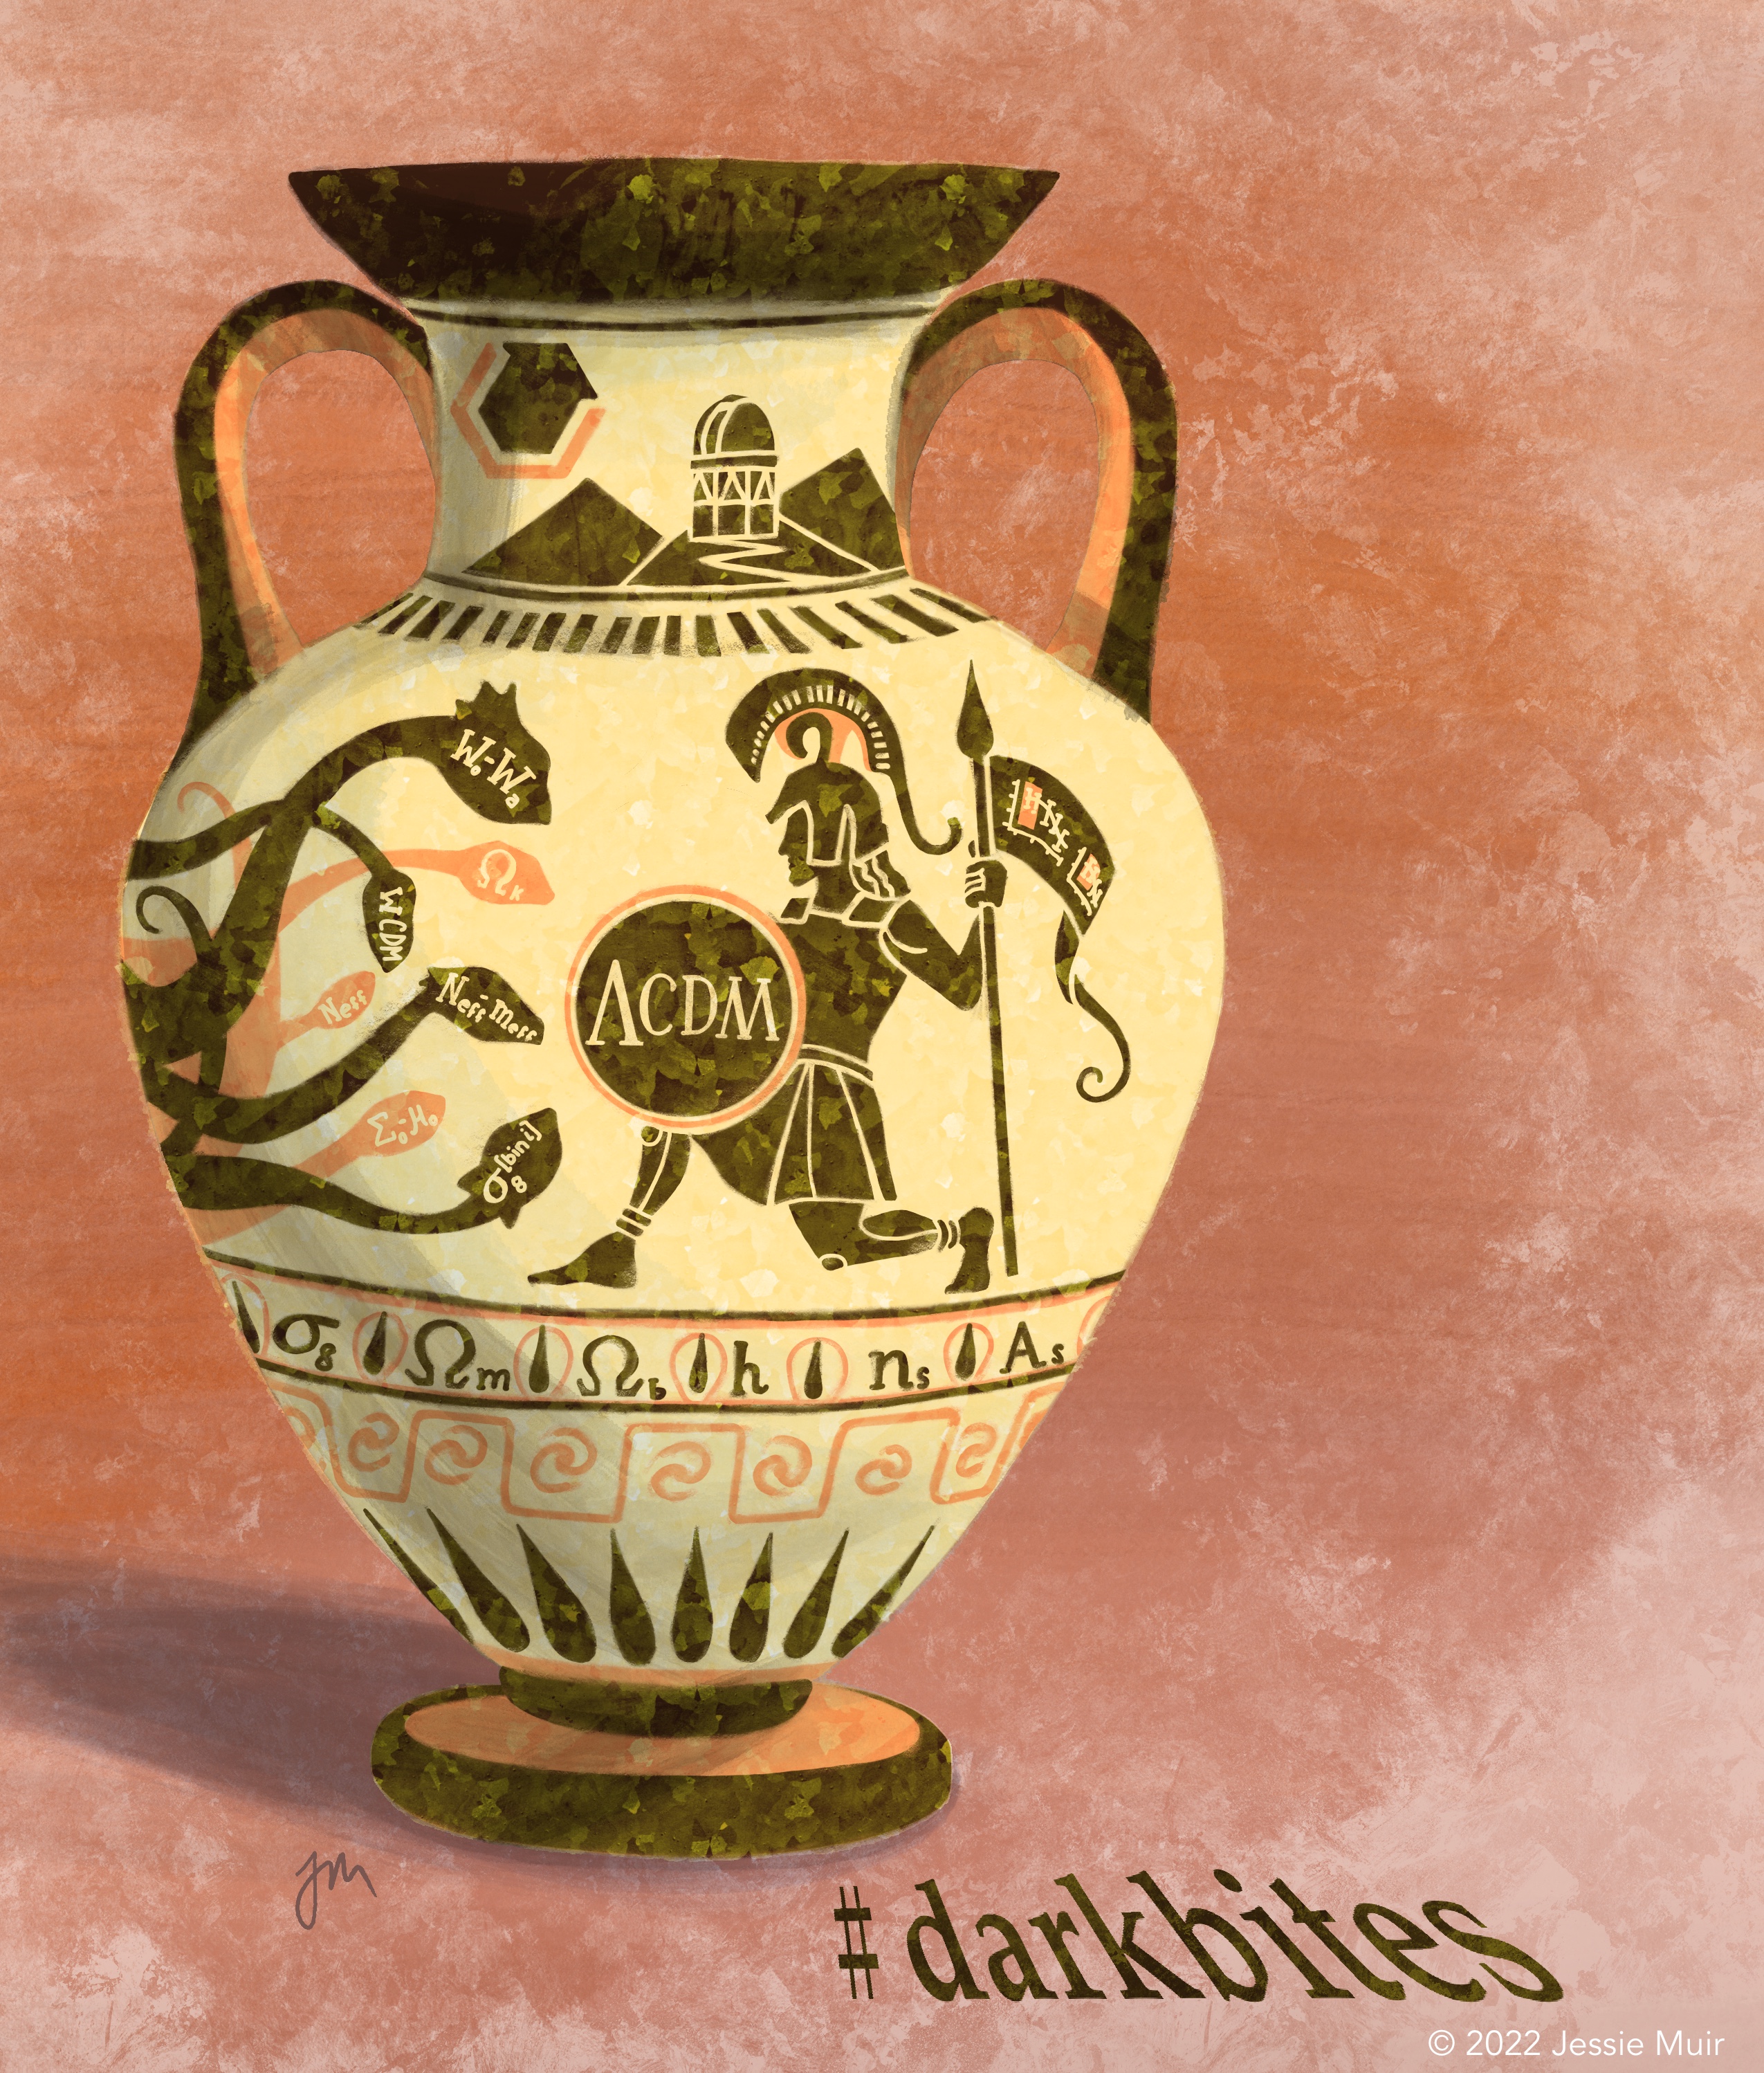 alt="Cartoon of a greek urn featuring a warrior fighting a hydra. The warrior's shield is labeled Lambda-CDM and each of the hydra's heads are labeled with parameters of model extensions we tested in the paper."